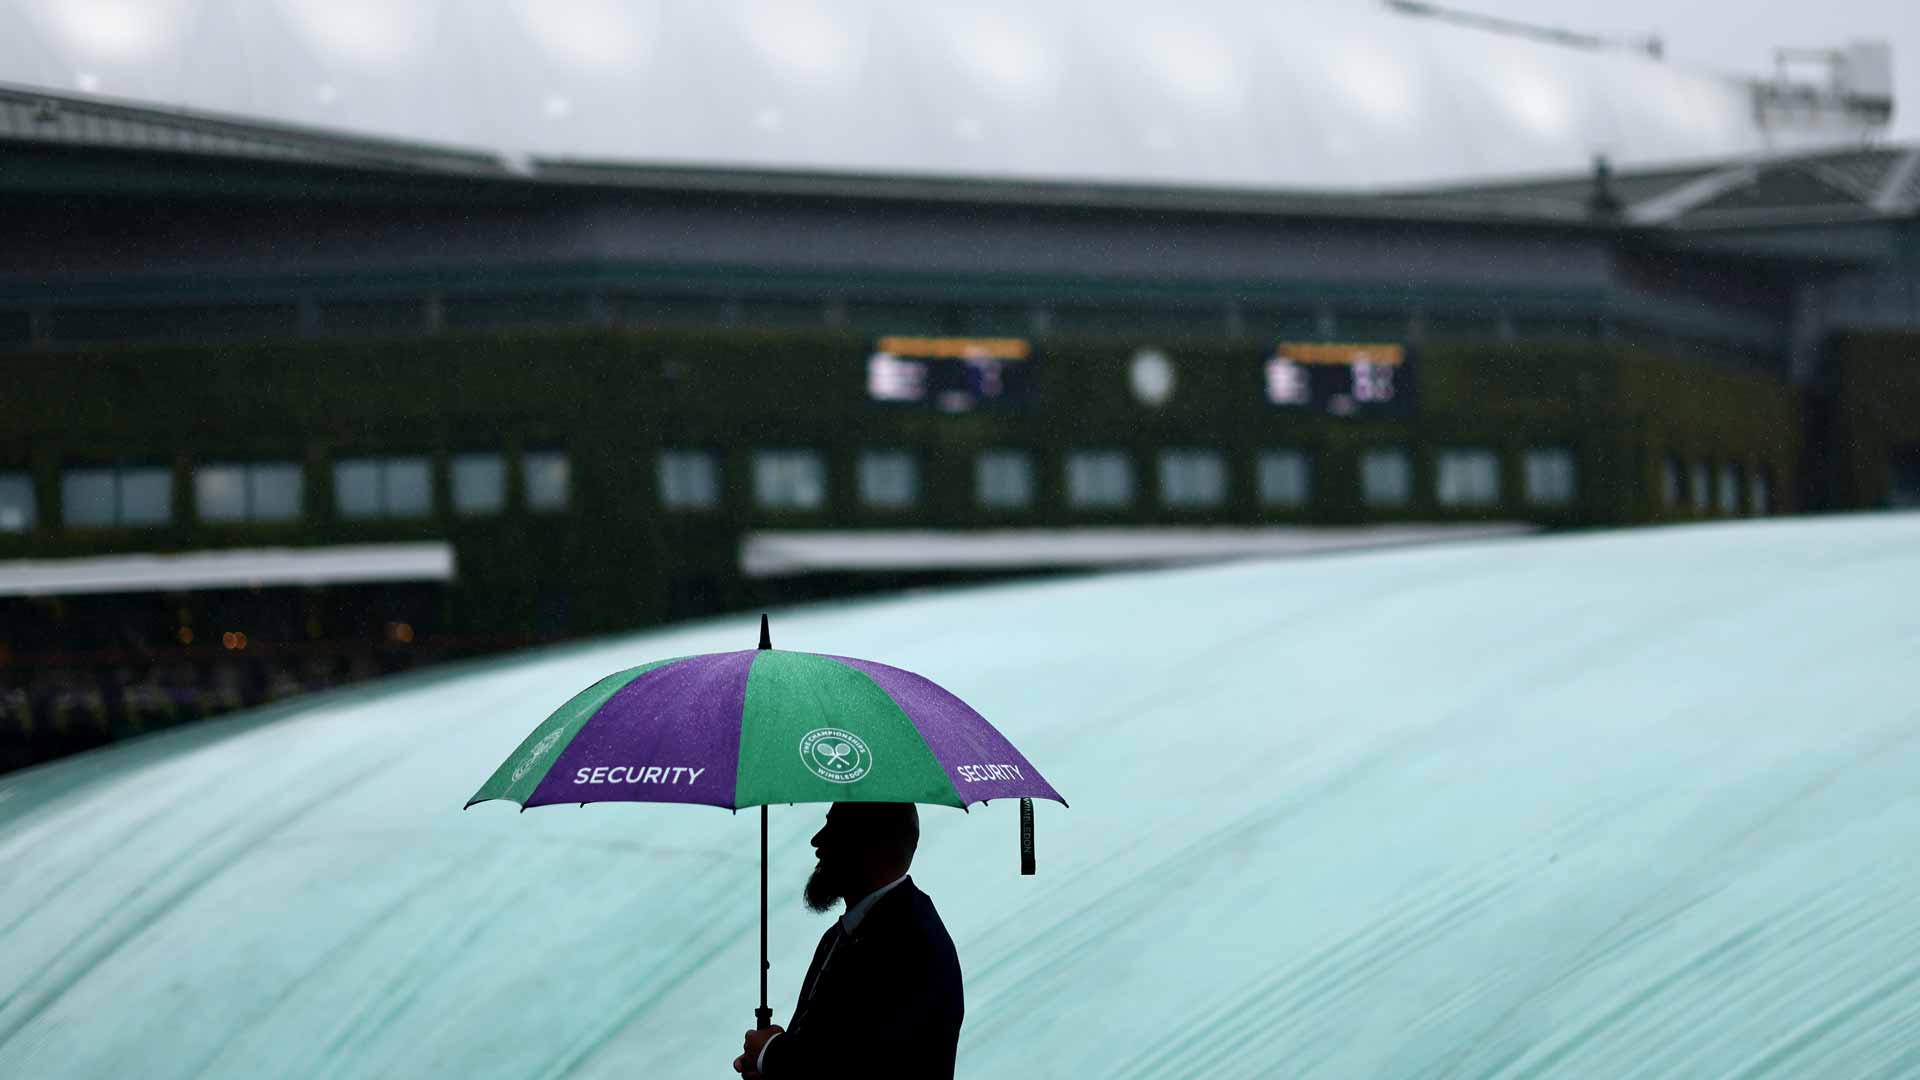 Rain wiped out most outdoor play at Wimbledon Friday.